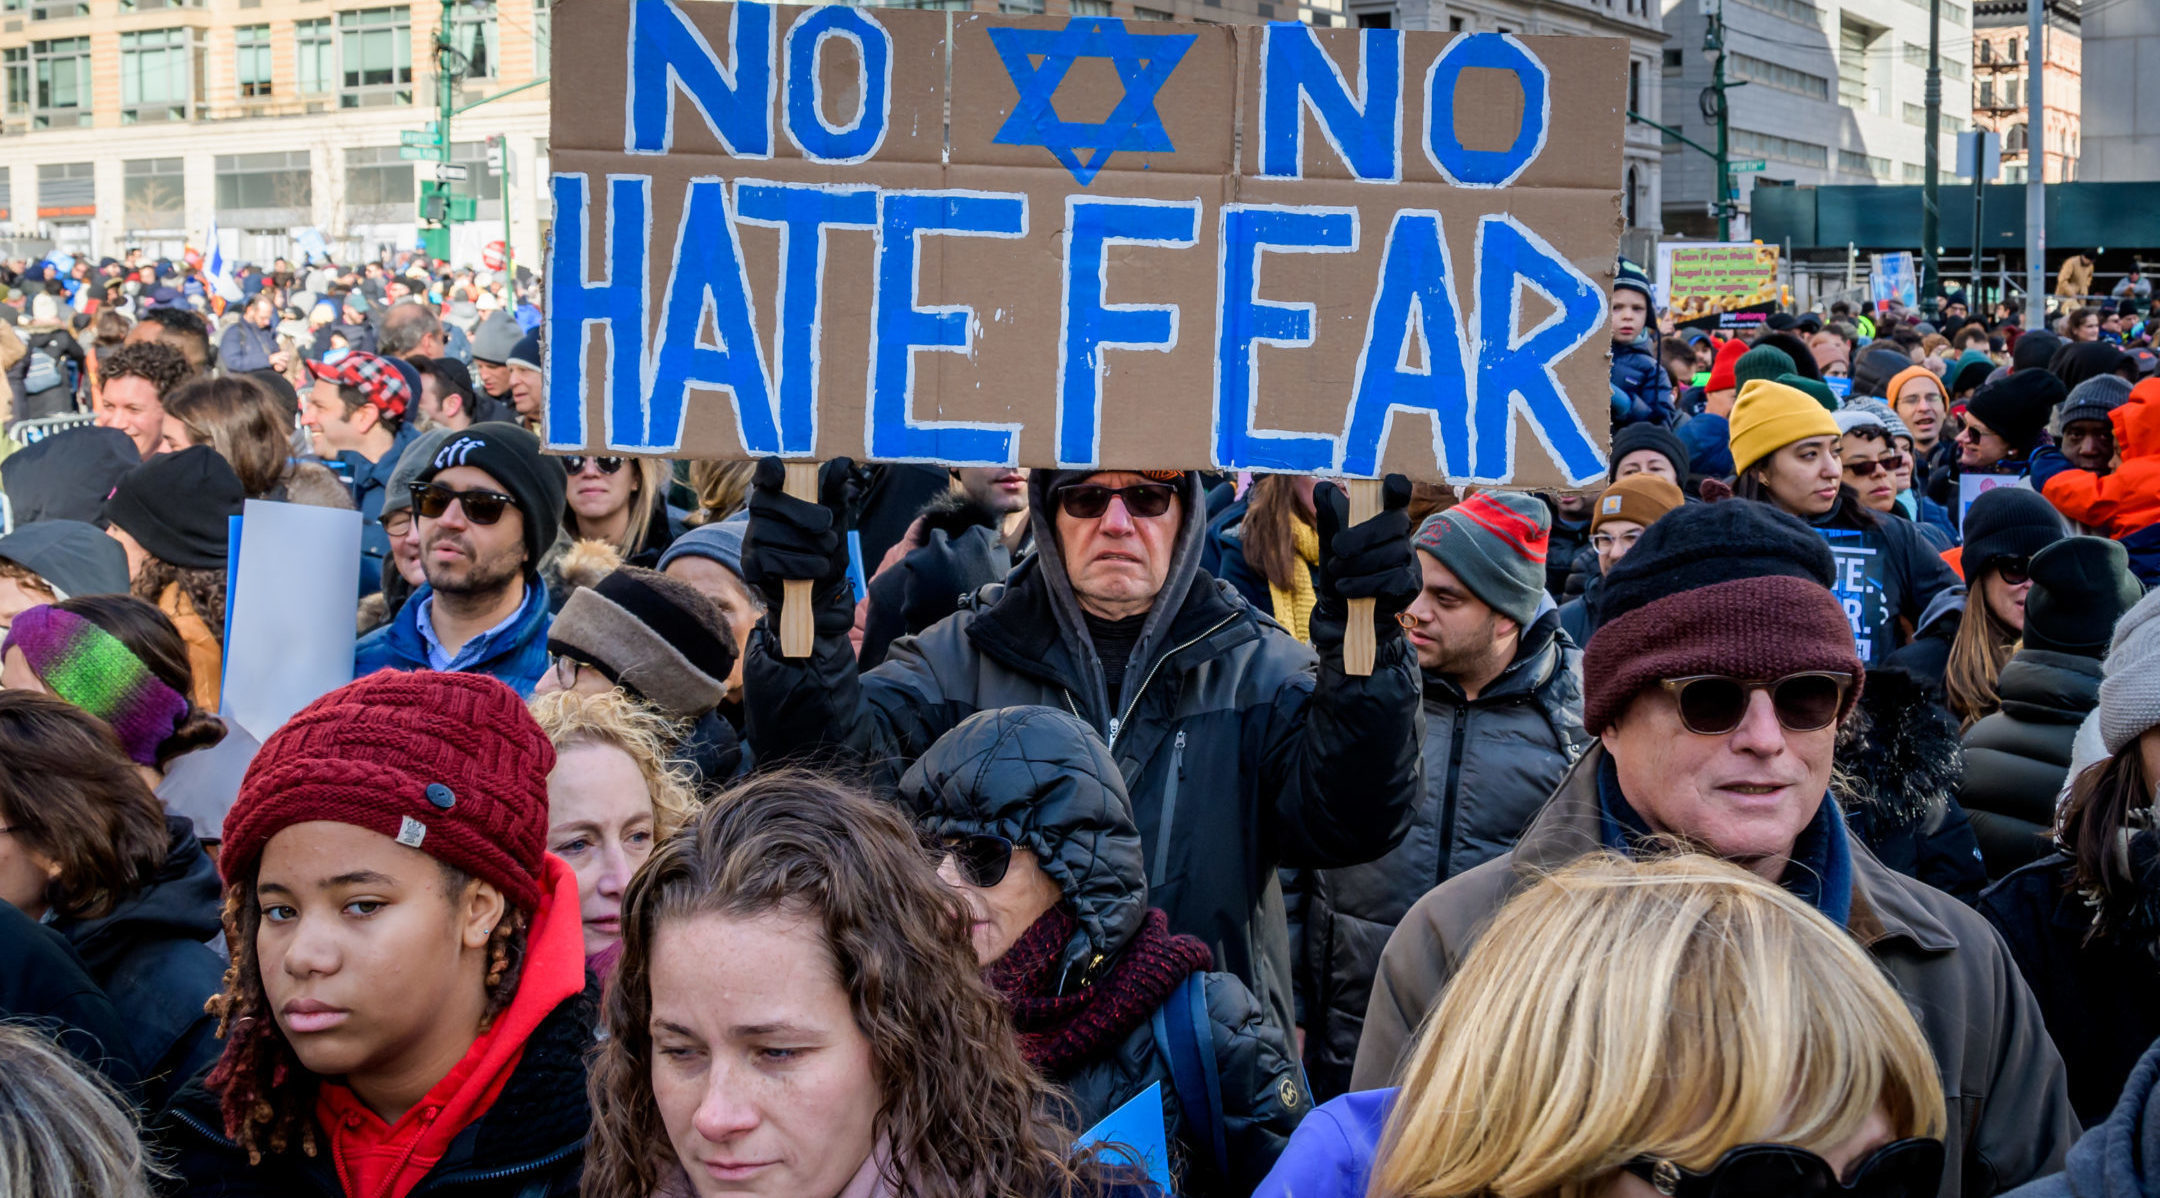 Thousands of New Yorkers convene at the “No Hate. No Fear” solidarity march against anti-Semitism in January 2020. The march followed a year in which attacks against Jews spiked. (Erik McGregor/LightRocket via Getty Images)